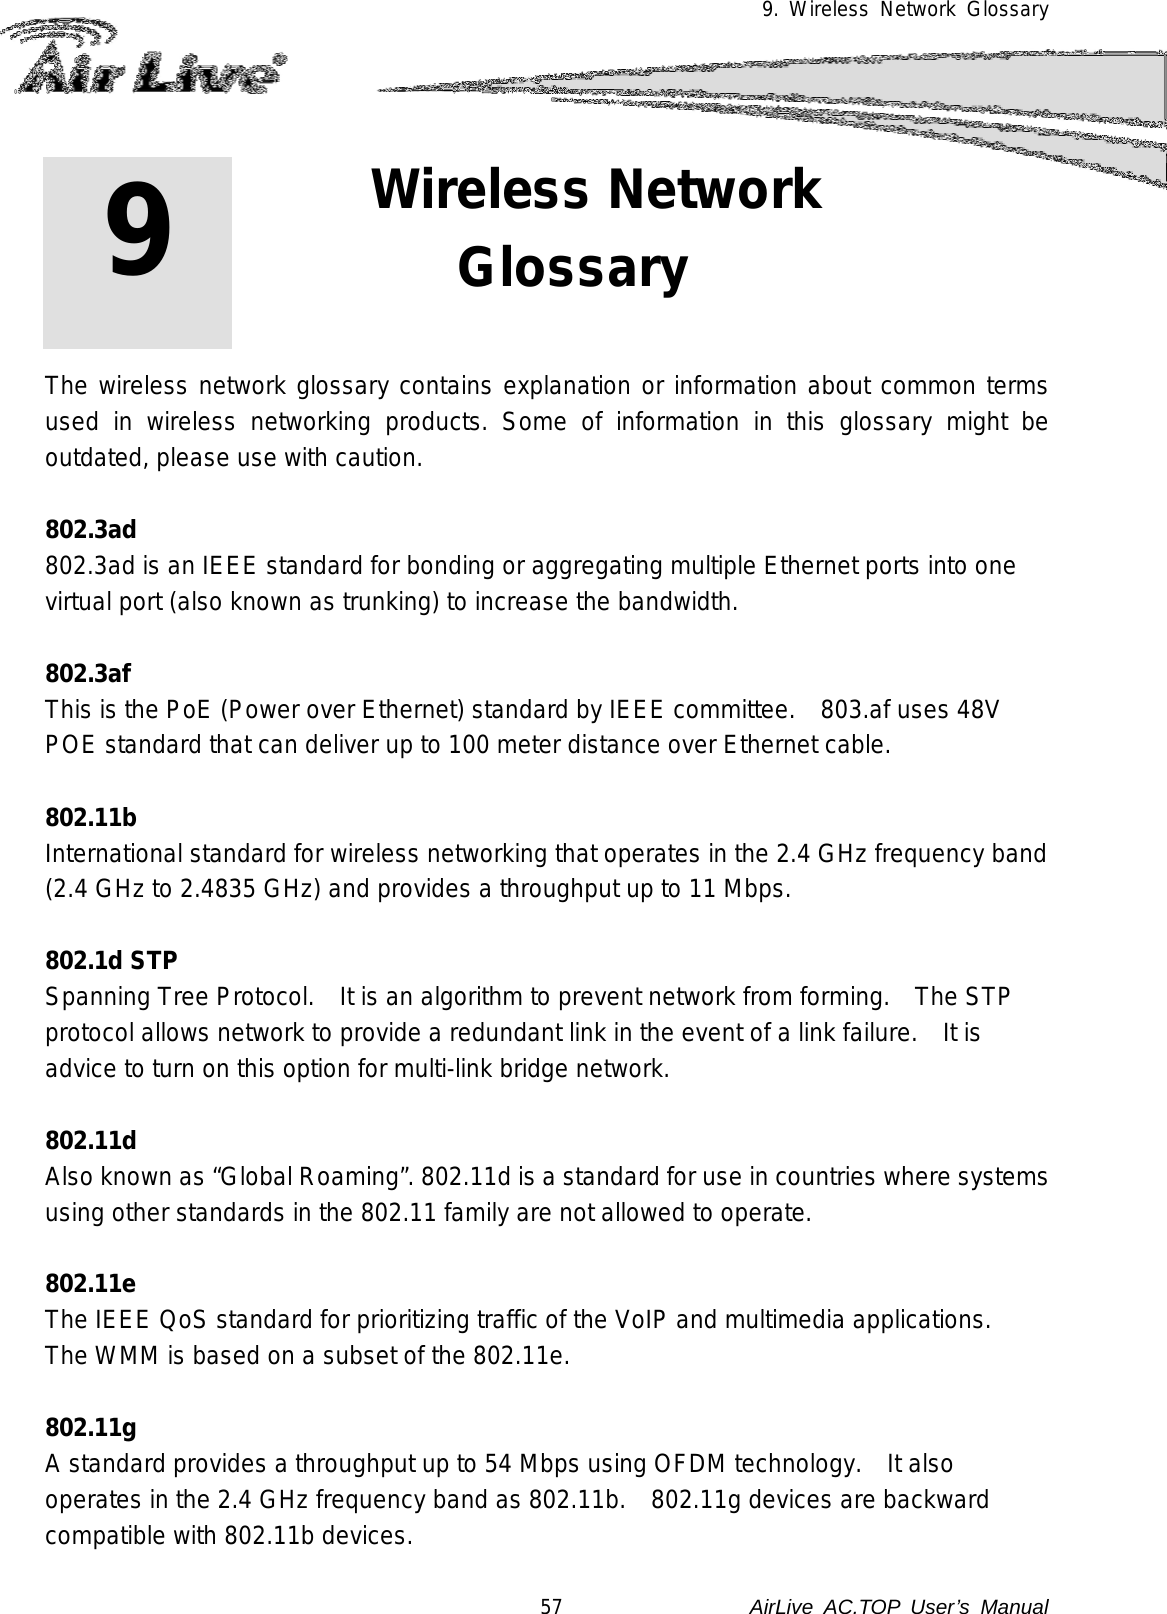 9. Wireless Network Glossary        The wireless network glossary contains explanation or information about common terms used in wireless networking products. Some of information in this glossary might be outdated, please use with caution.  802.3ad 802.3ad is an IEEE standard for bonding or aggregating multiple Ethernet ports into one virtual port (also known as trunking) to increase the bandwidth.  802.3af This is the PoE (Power over Ethernet) standard by IEEE committee.   803.af uses 48V POE standard that can deliver up to 100 meter distance over Ethernet cable.  802.11b International standard for wireless networking that operates in the 2.4 GHz frequency band (2.4 GHz to 2.4835 GHz) and provides a throughput up to 11 Mbps.    802.1d STP Spanning Tree Protocol.  It is an algorithm to prevent network from forming.    The STP protocol allows network to provide a redundant link in the event of a link failure.   It is advice to turn on this option for multi-link bridge network.  802.11d Also known as “Global Roaming”. 802.11d is a standard for use in countries where systems using other standards in the 802.11 family are not allowed to operate.  802.11e The IEEE QoS standard for prioritizing traffic of the VoIP and multimedia applications.  The WMM is based on a subset of the 802.11e.  802.11g A standard provides a throughput up to 54 Mbps using OFDM technology.    It also operates in the 2.4 GHz frequency band as 802.11b.   802.11g devices are backward compatible with 802.11b devices. 9 9. Wireless Network Glossary  57               AirLive  AC.TOP User’s Manual 